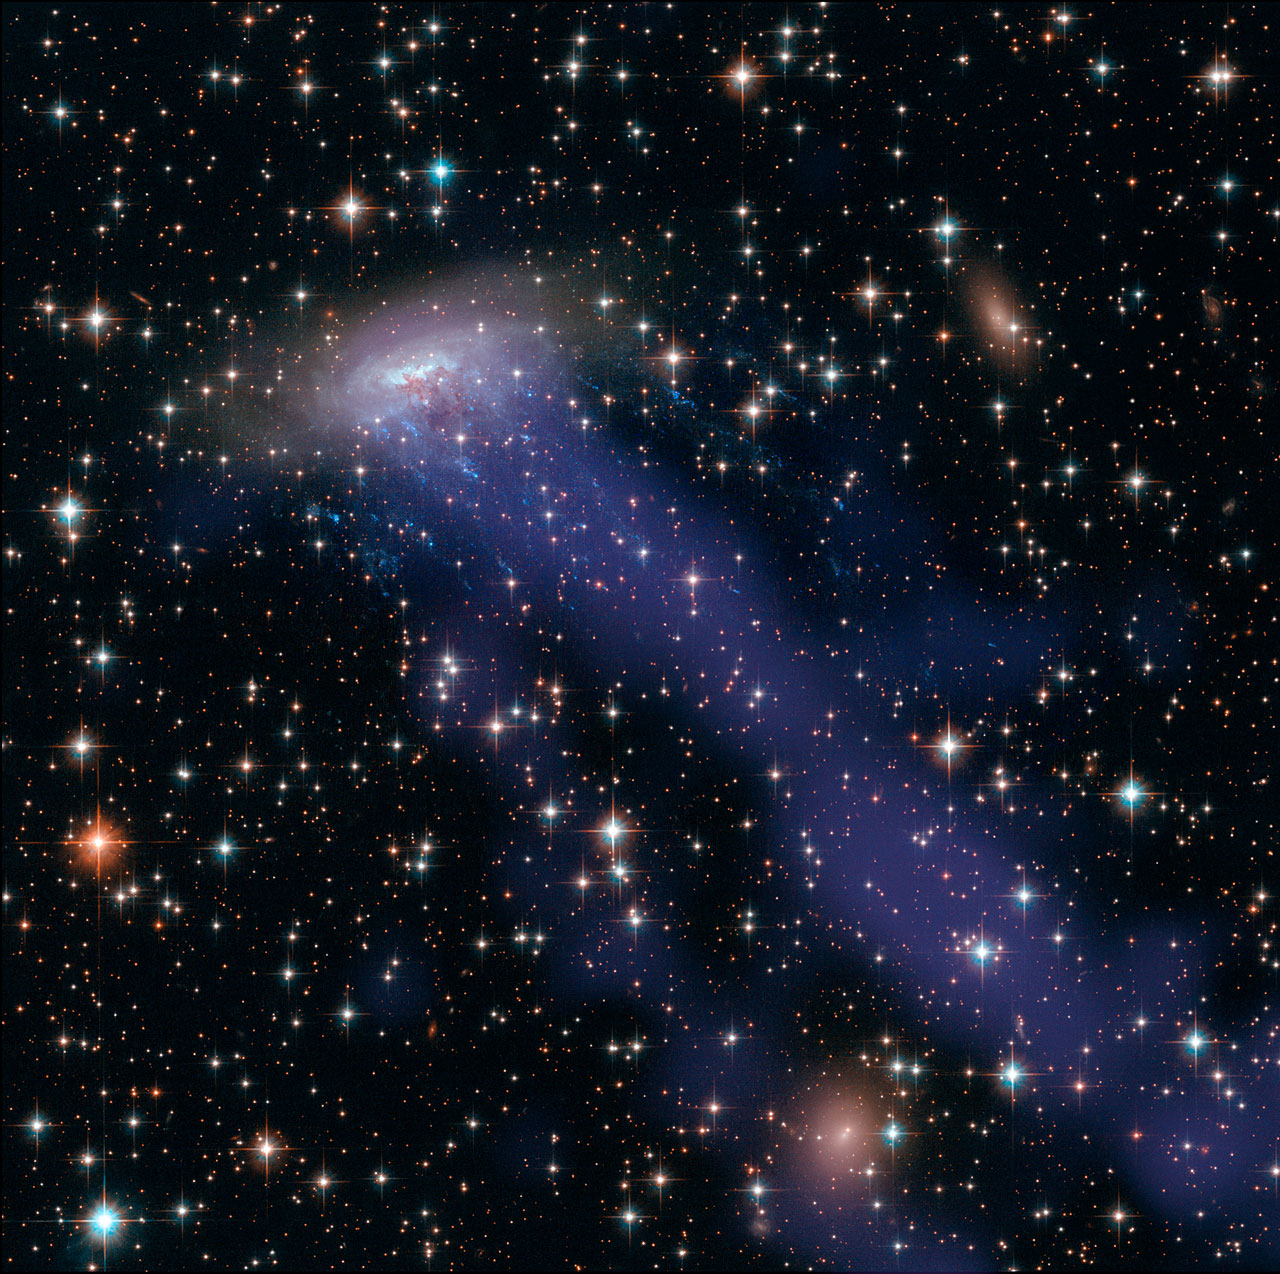  " as well as the electric blue ram pressure stripping streaks seen emanating from eso 137-001, a giant gas stream can be seen extending towards the bottom of the frame, only visible in the x-ray part of the spectrum " 